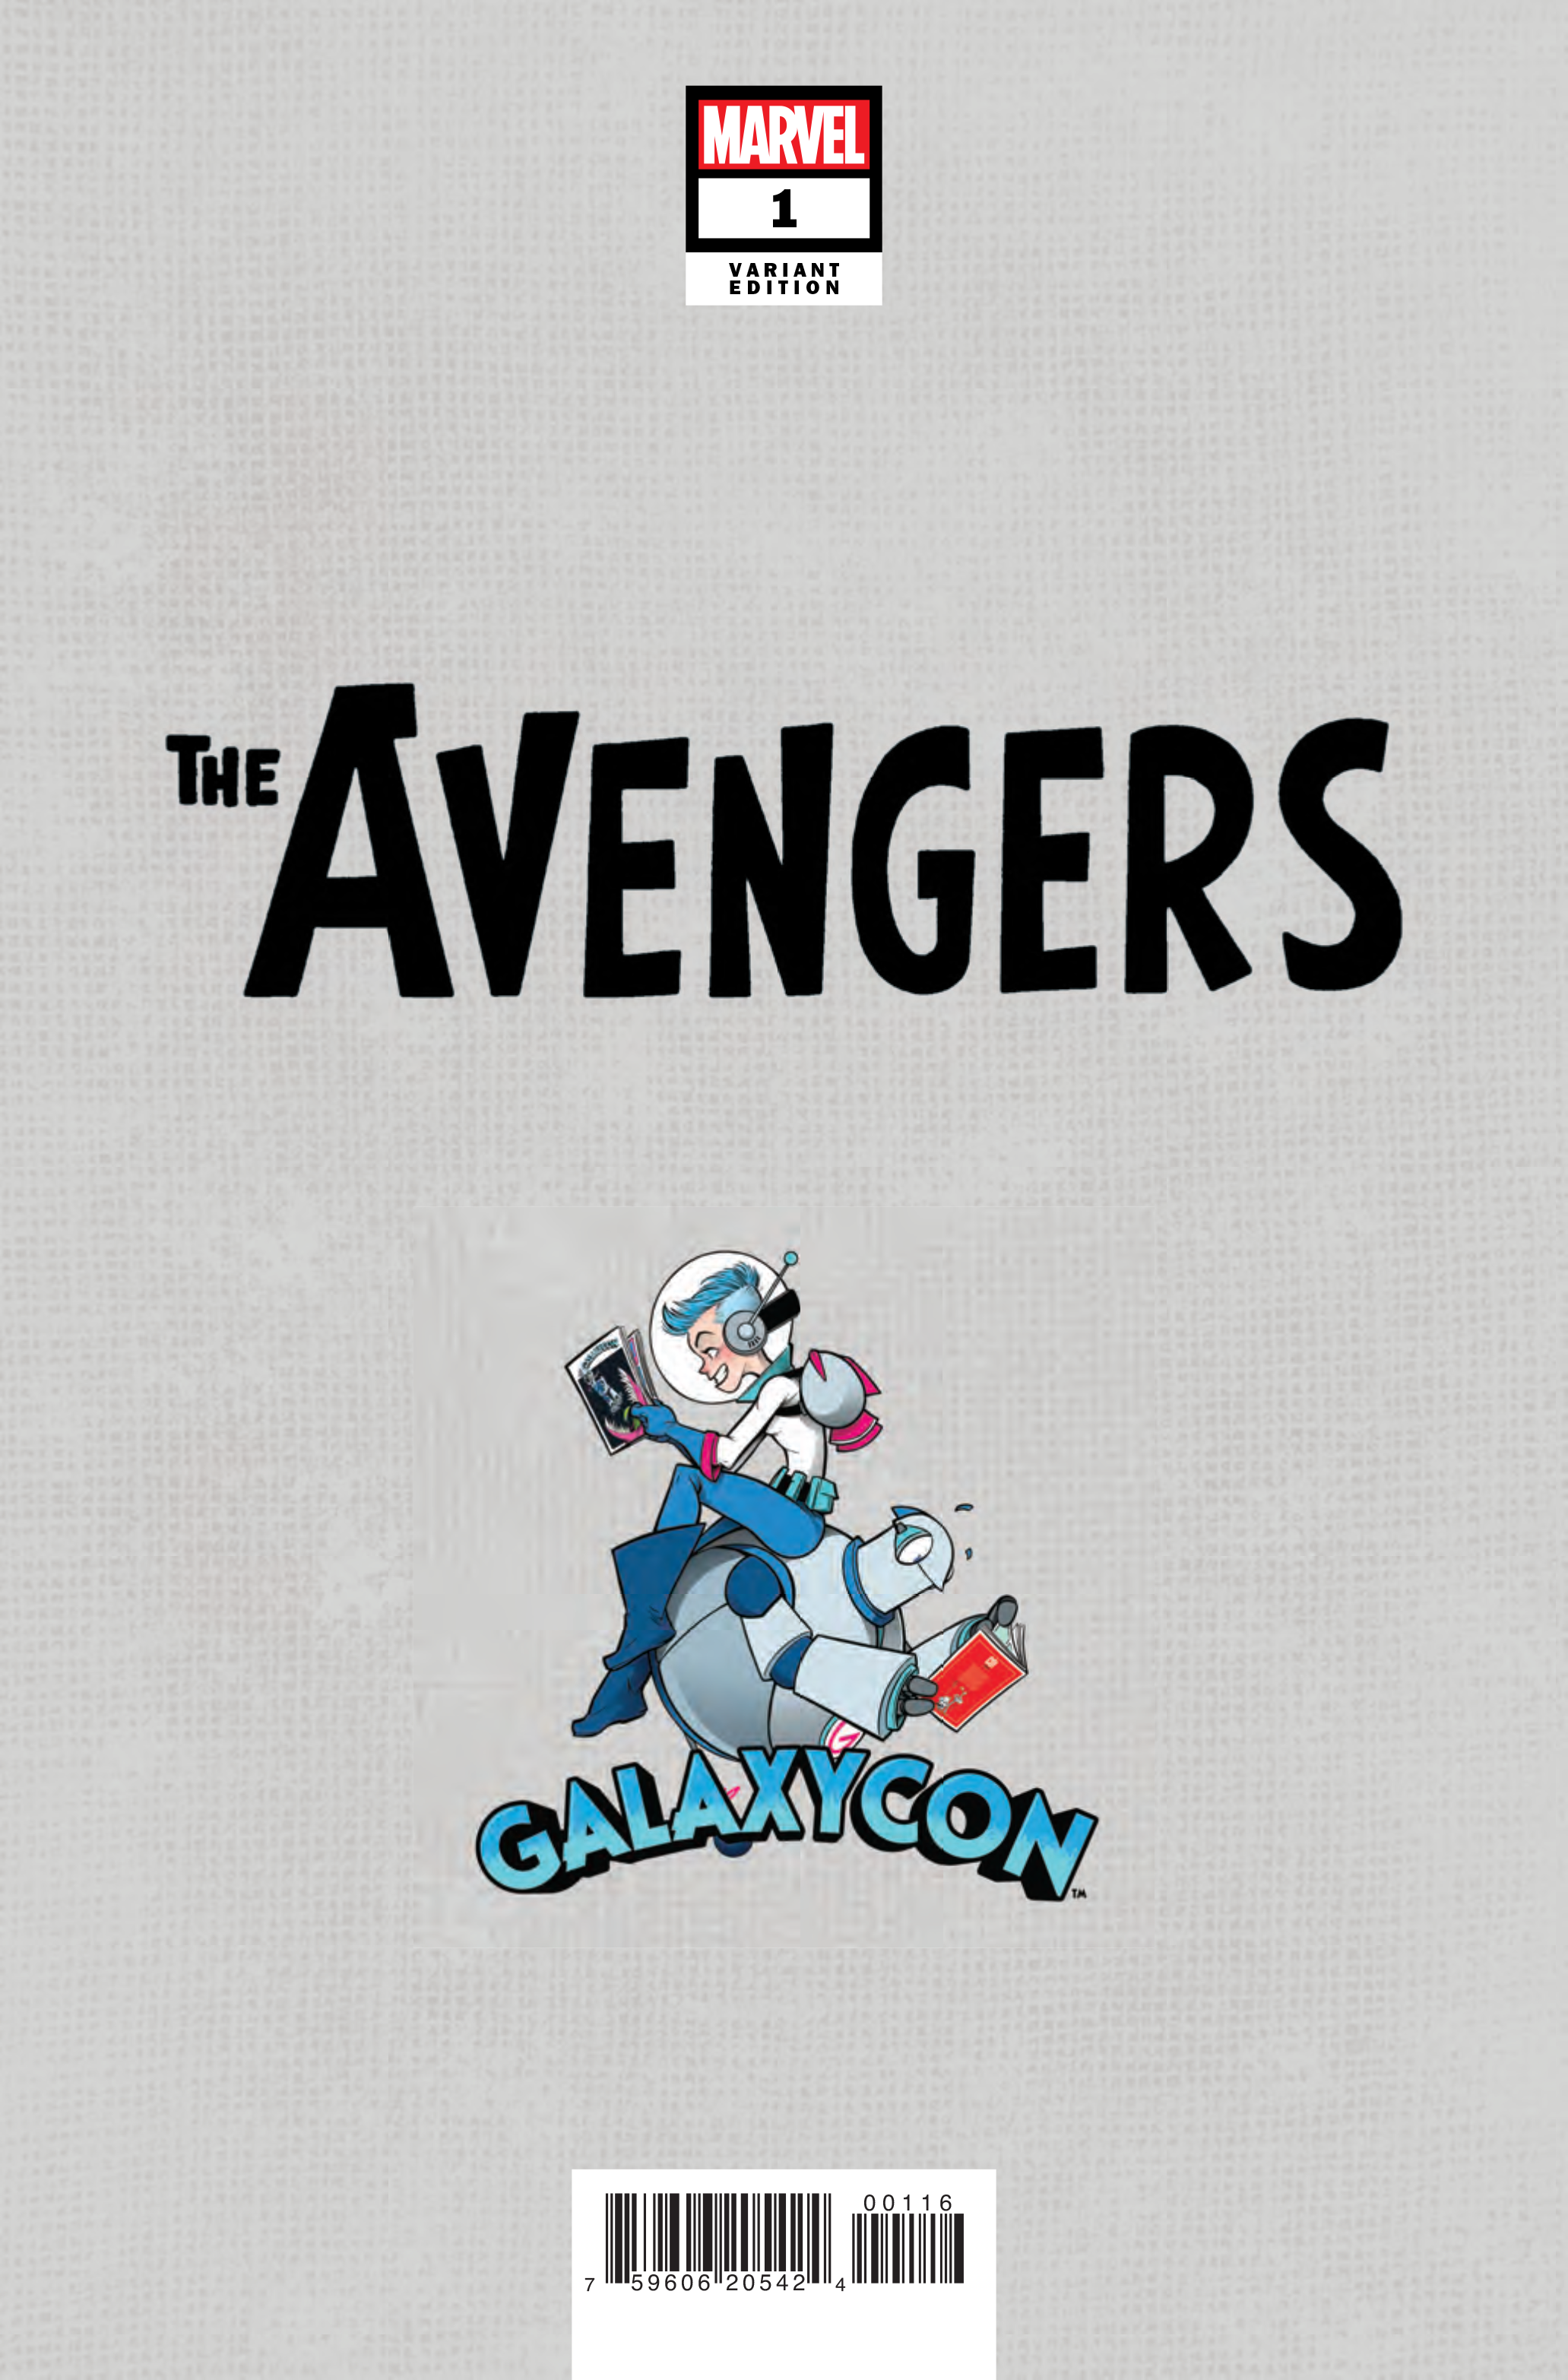 The Avengers #1 GalaxyCon Exclusive Variant Facsimile Edition Comic